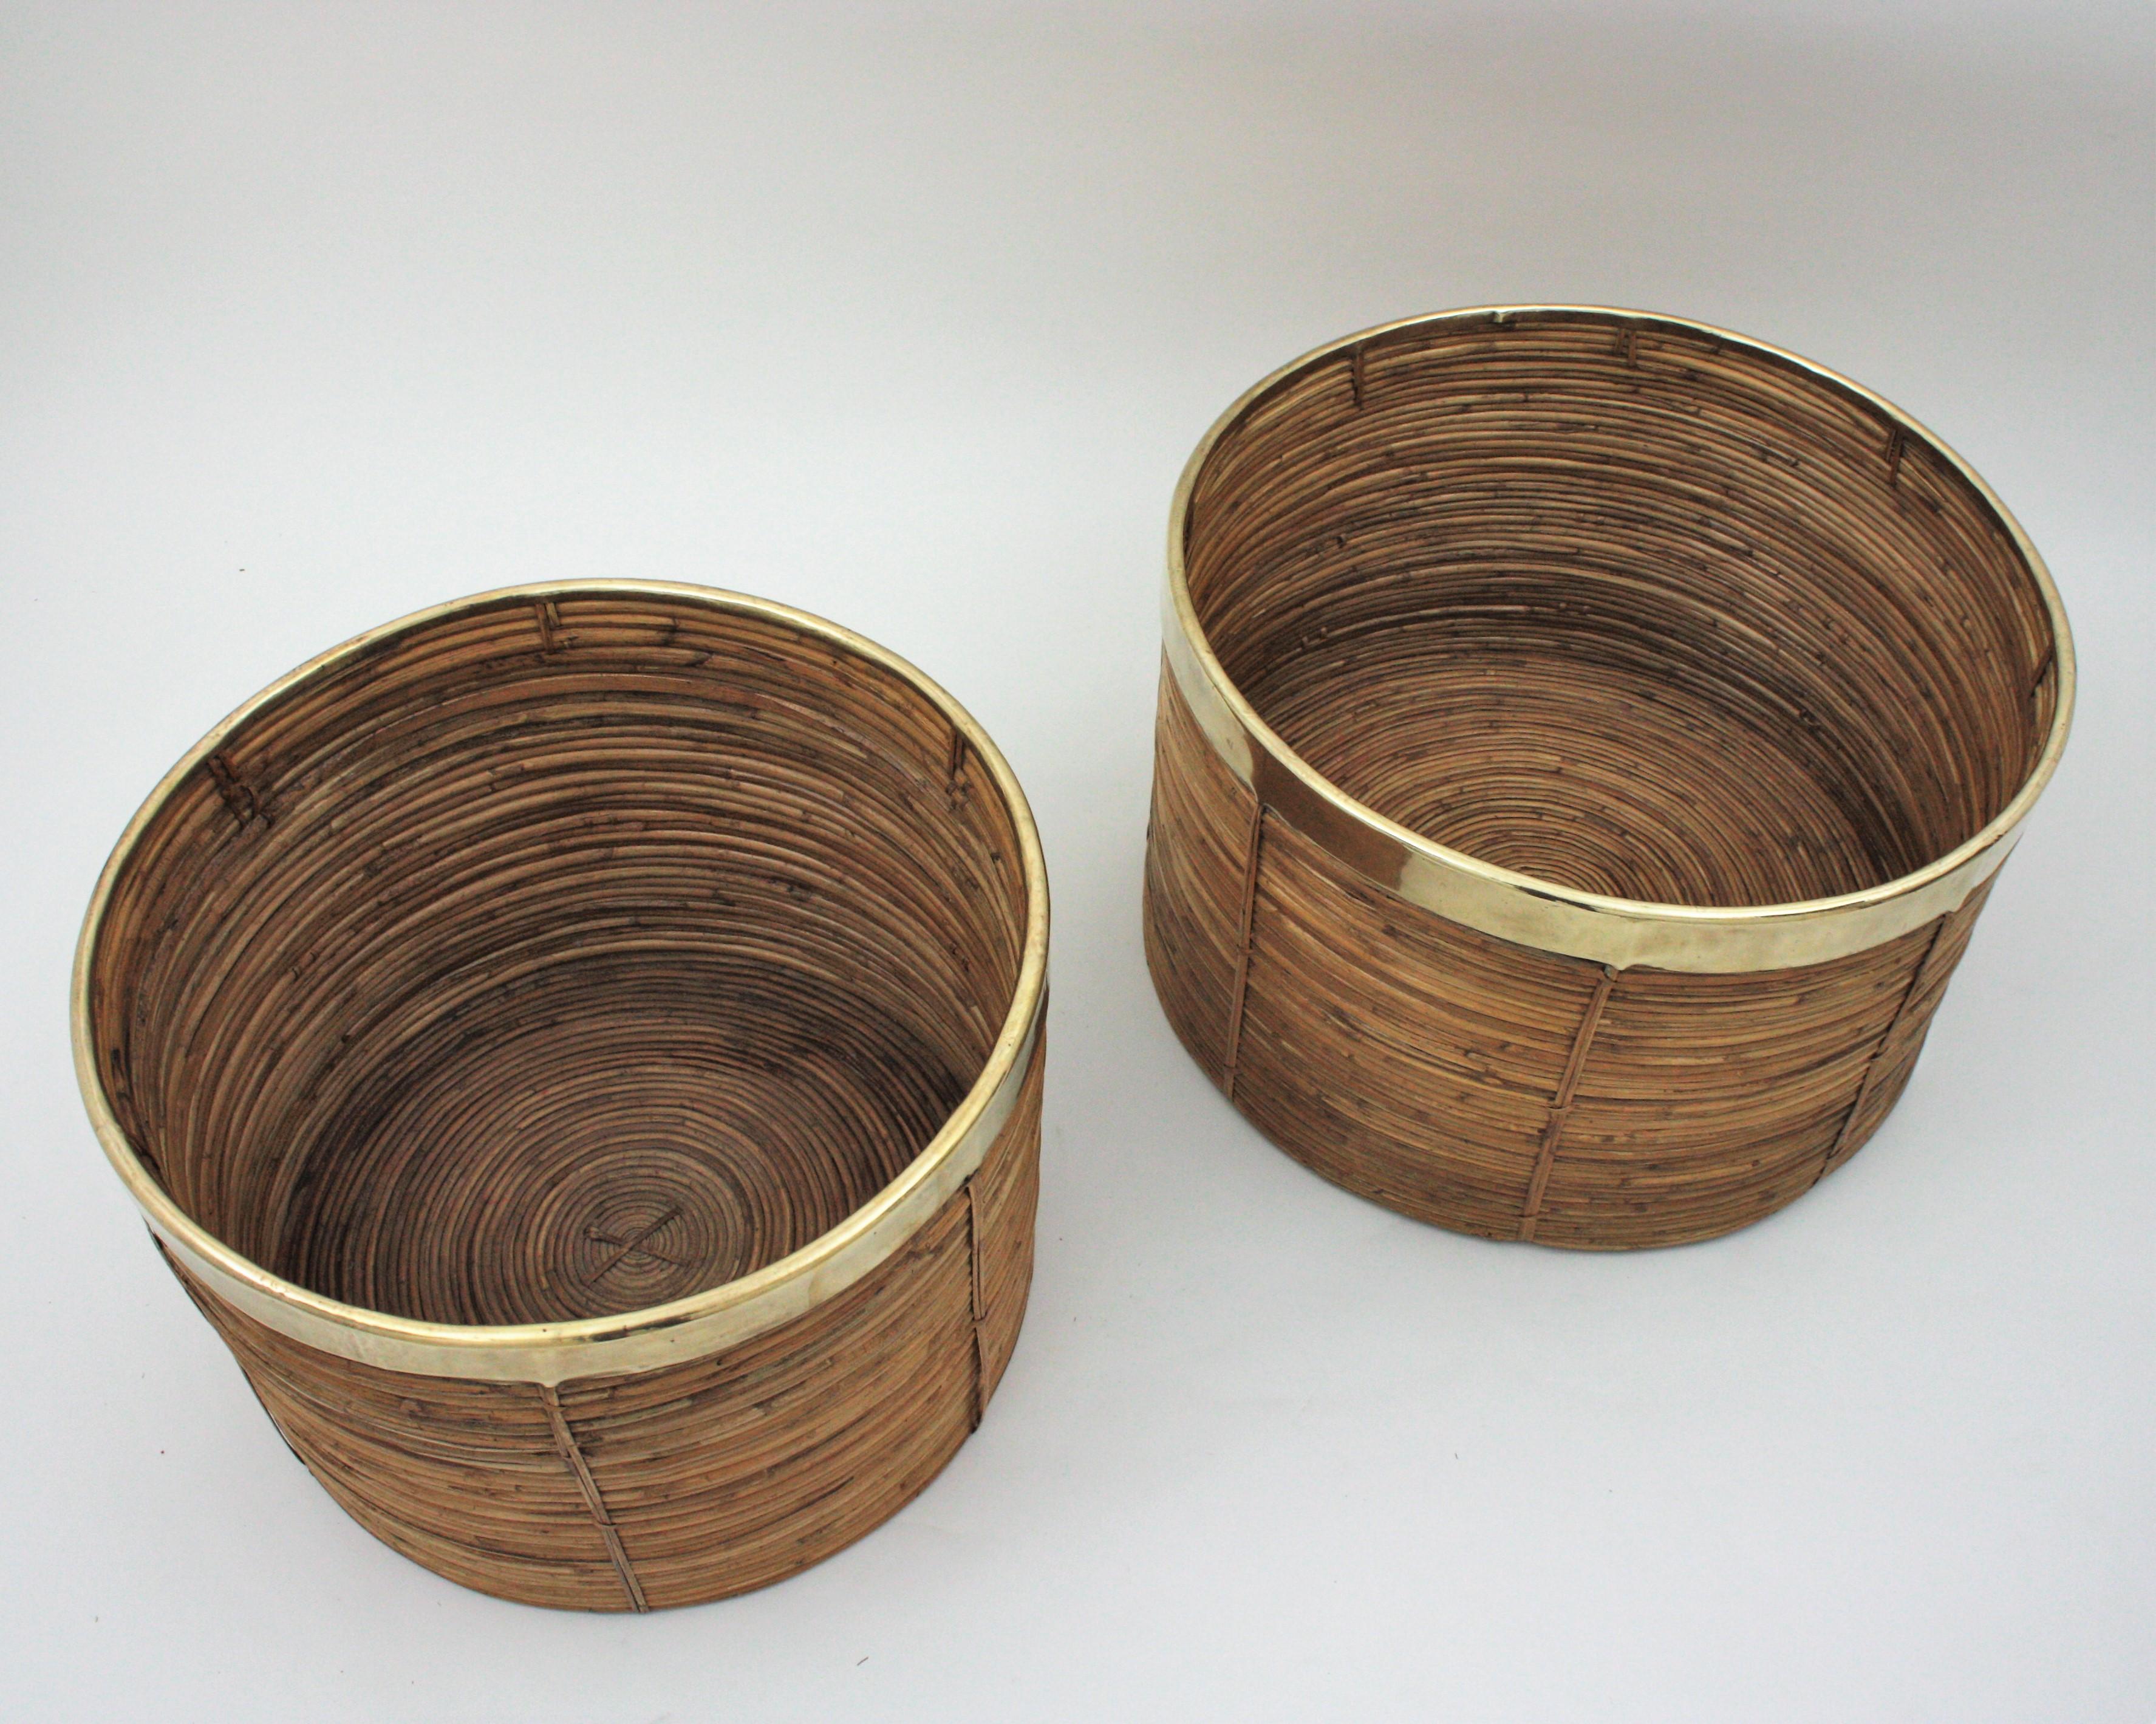 Pair of Extra Large Rattan Round Planters with Brass Rim, Italy, 1970s For Sale 5